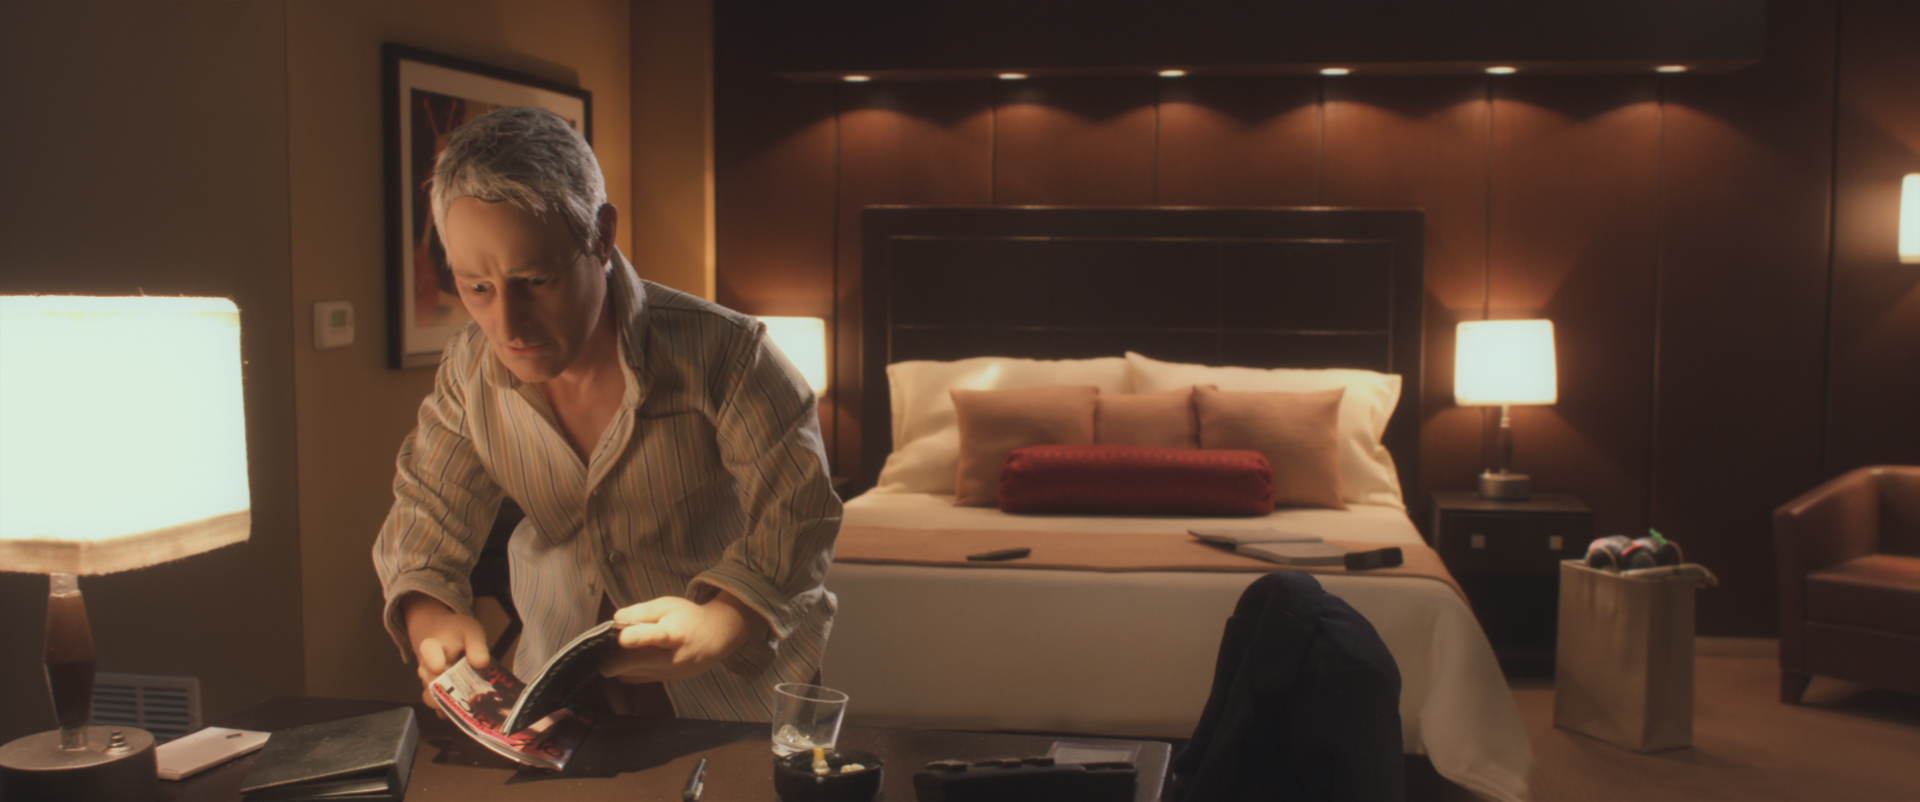 David Thewlis voices Michael Stone in the animated stop-motion film, ANOMALISA, by Paramount Pictures